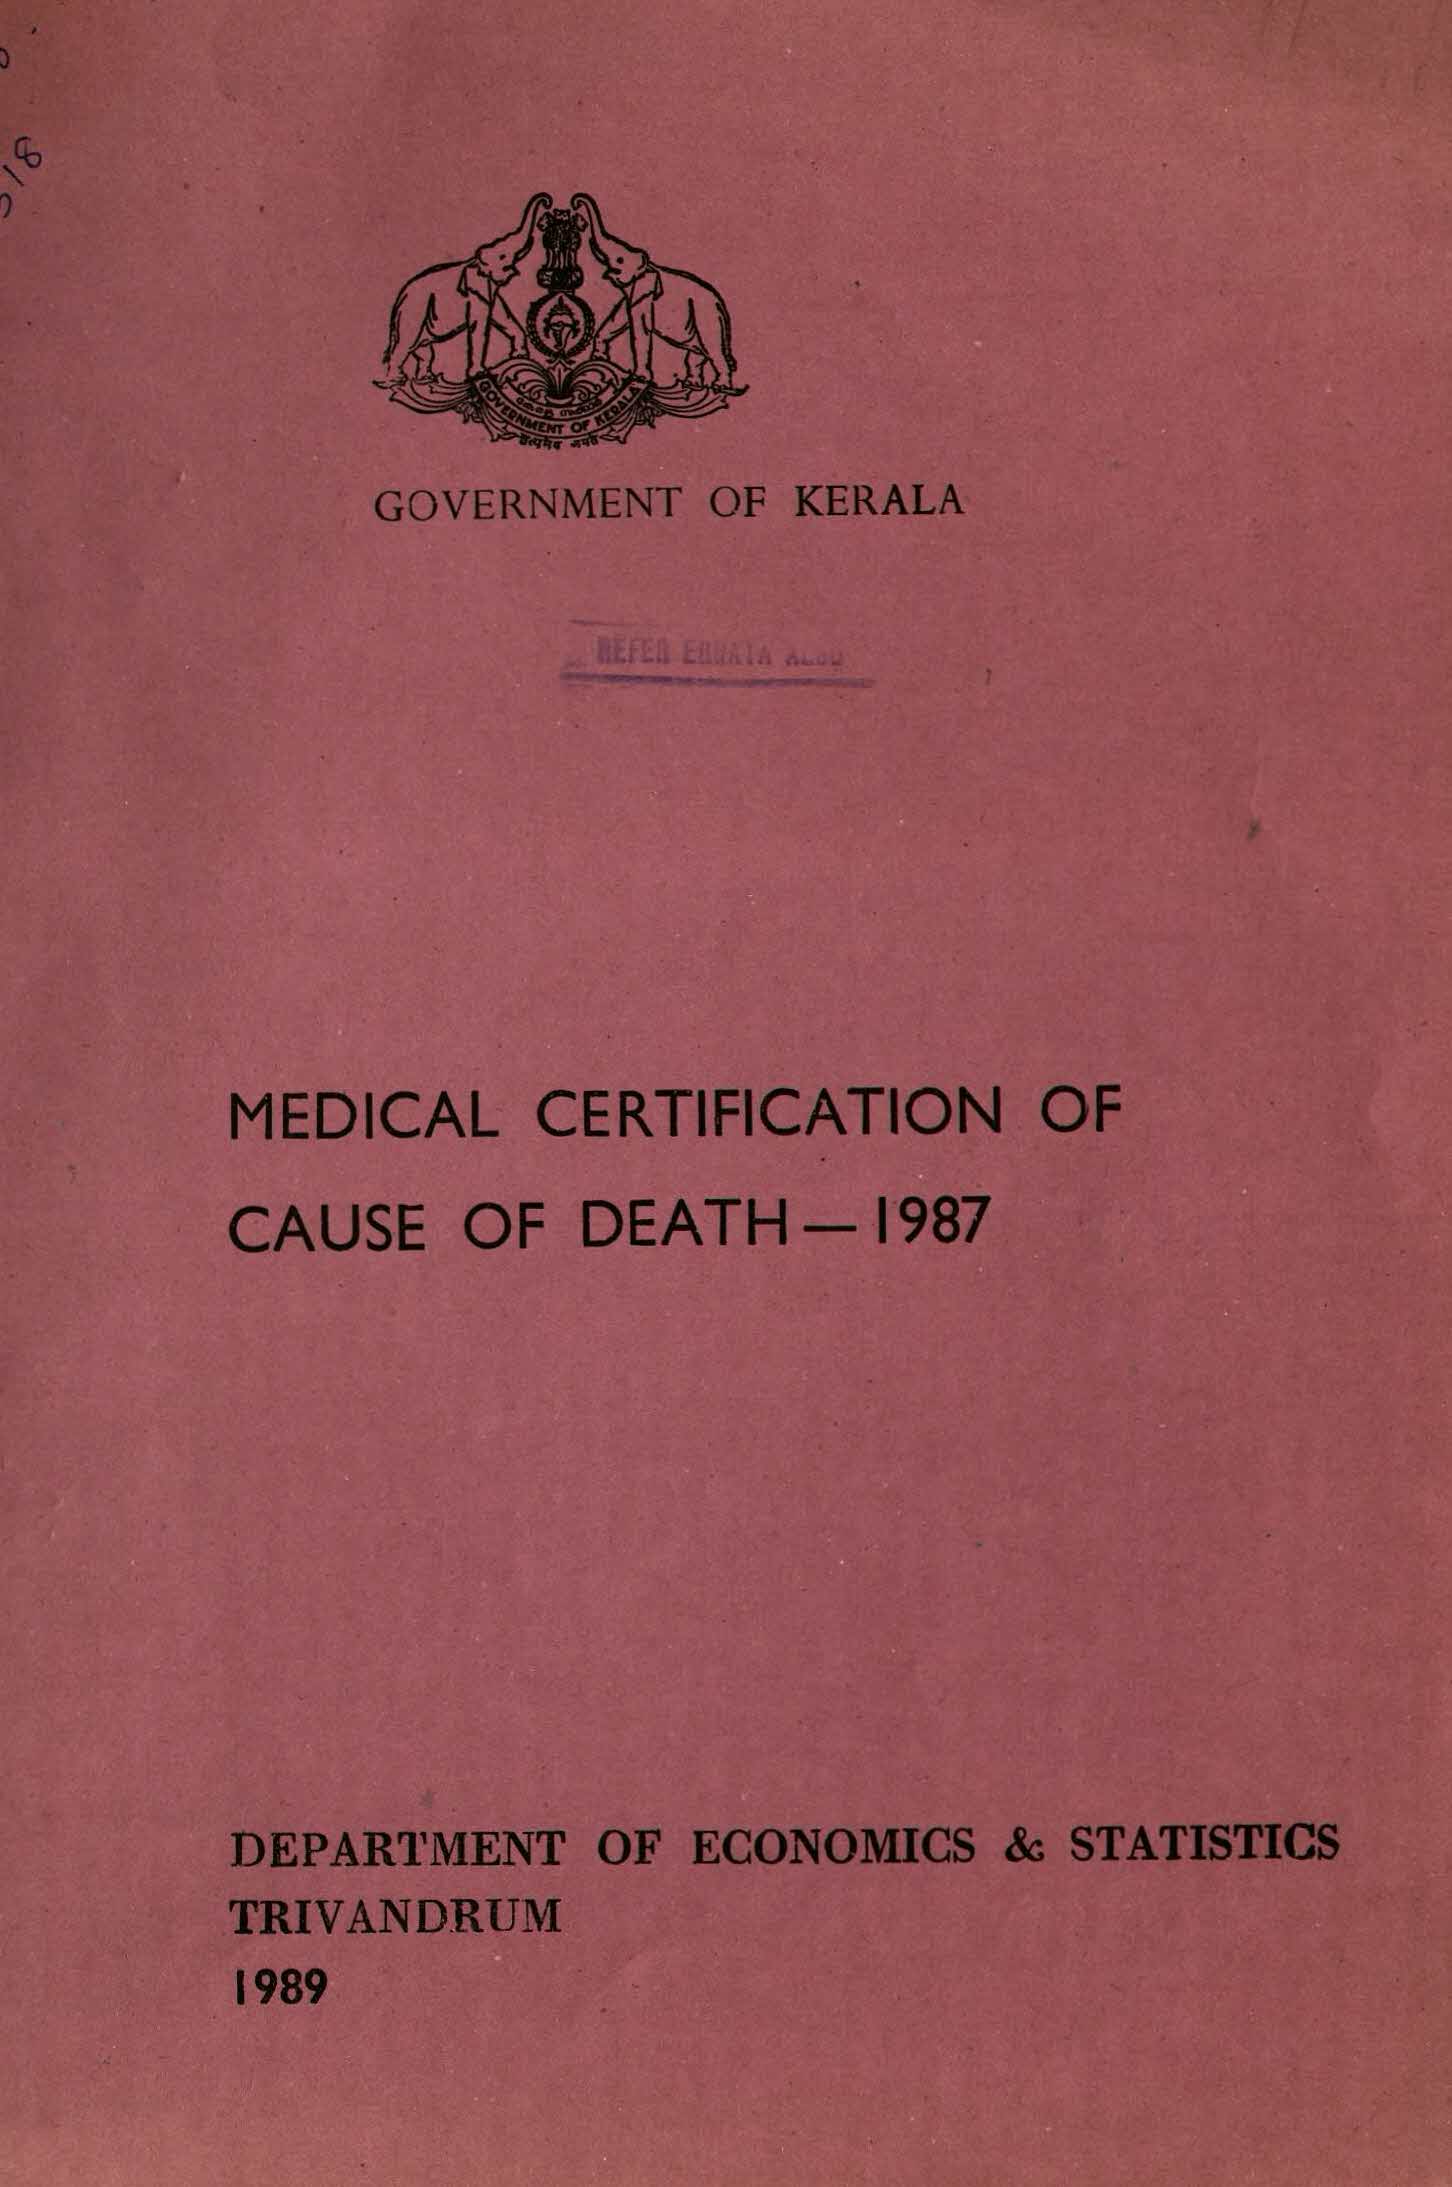 Medical Certification of Cause of death - 1987